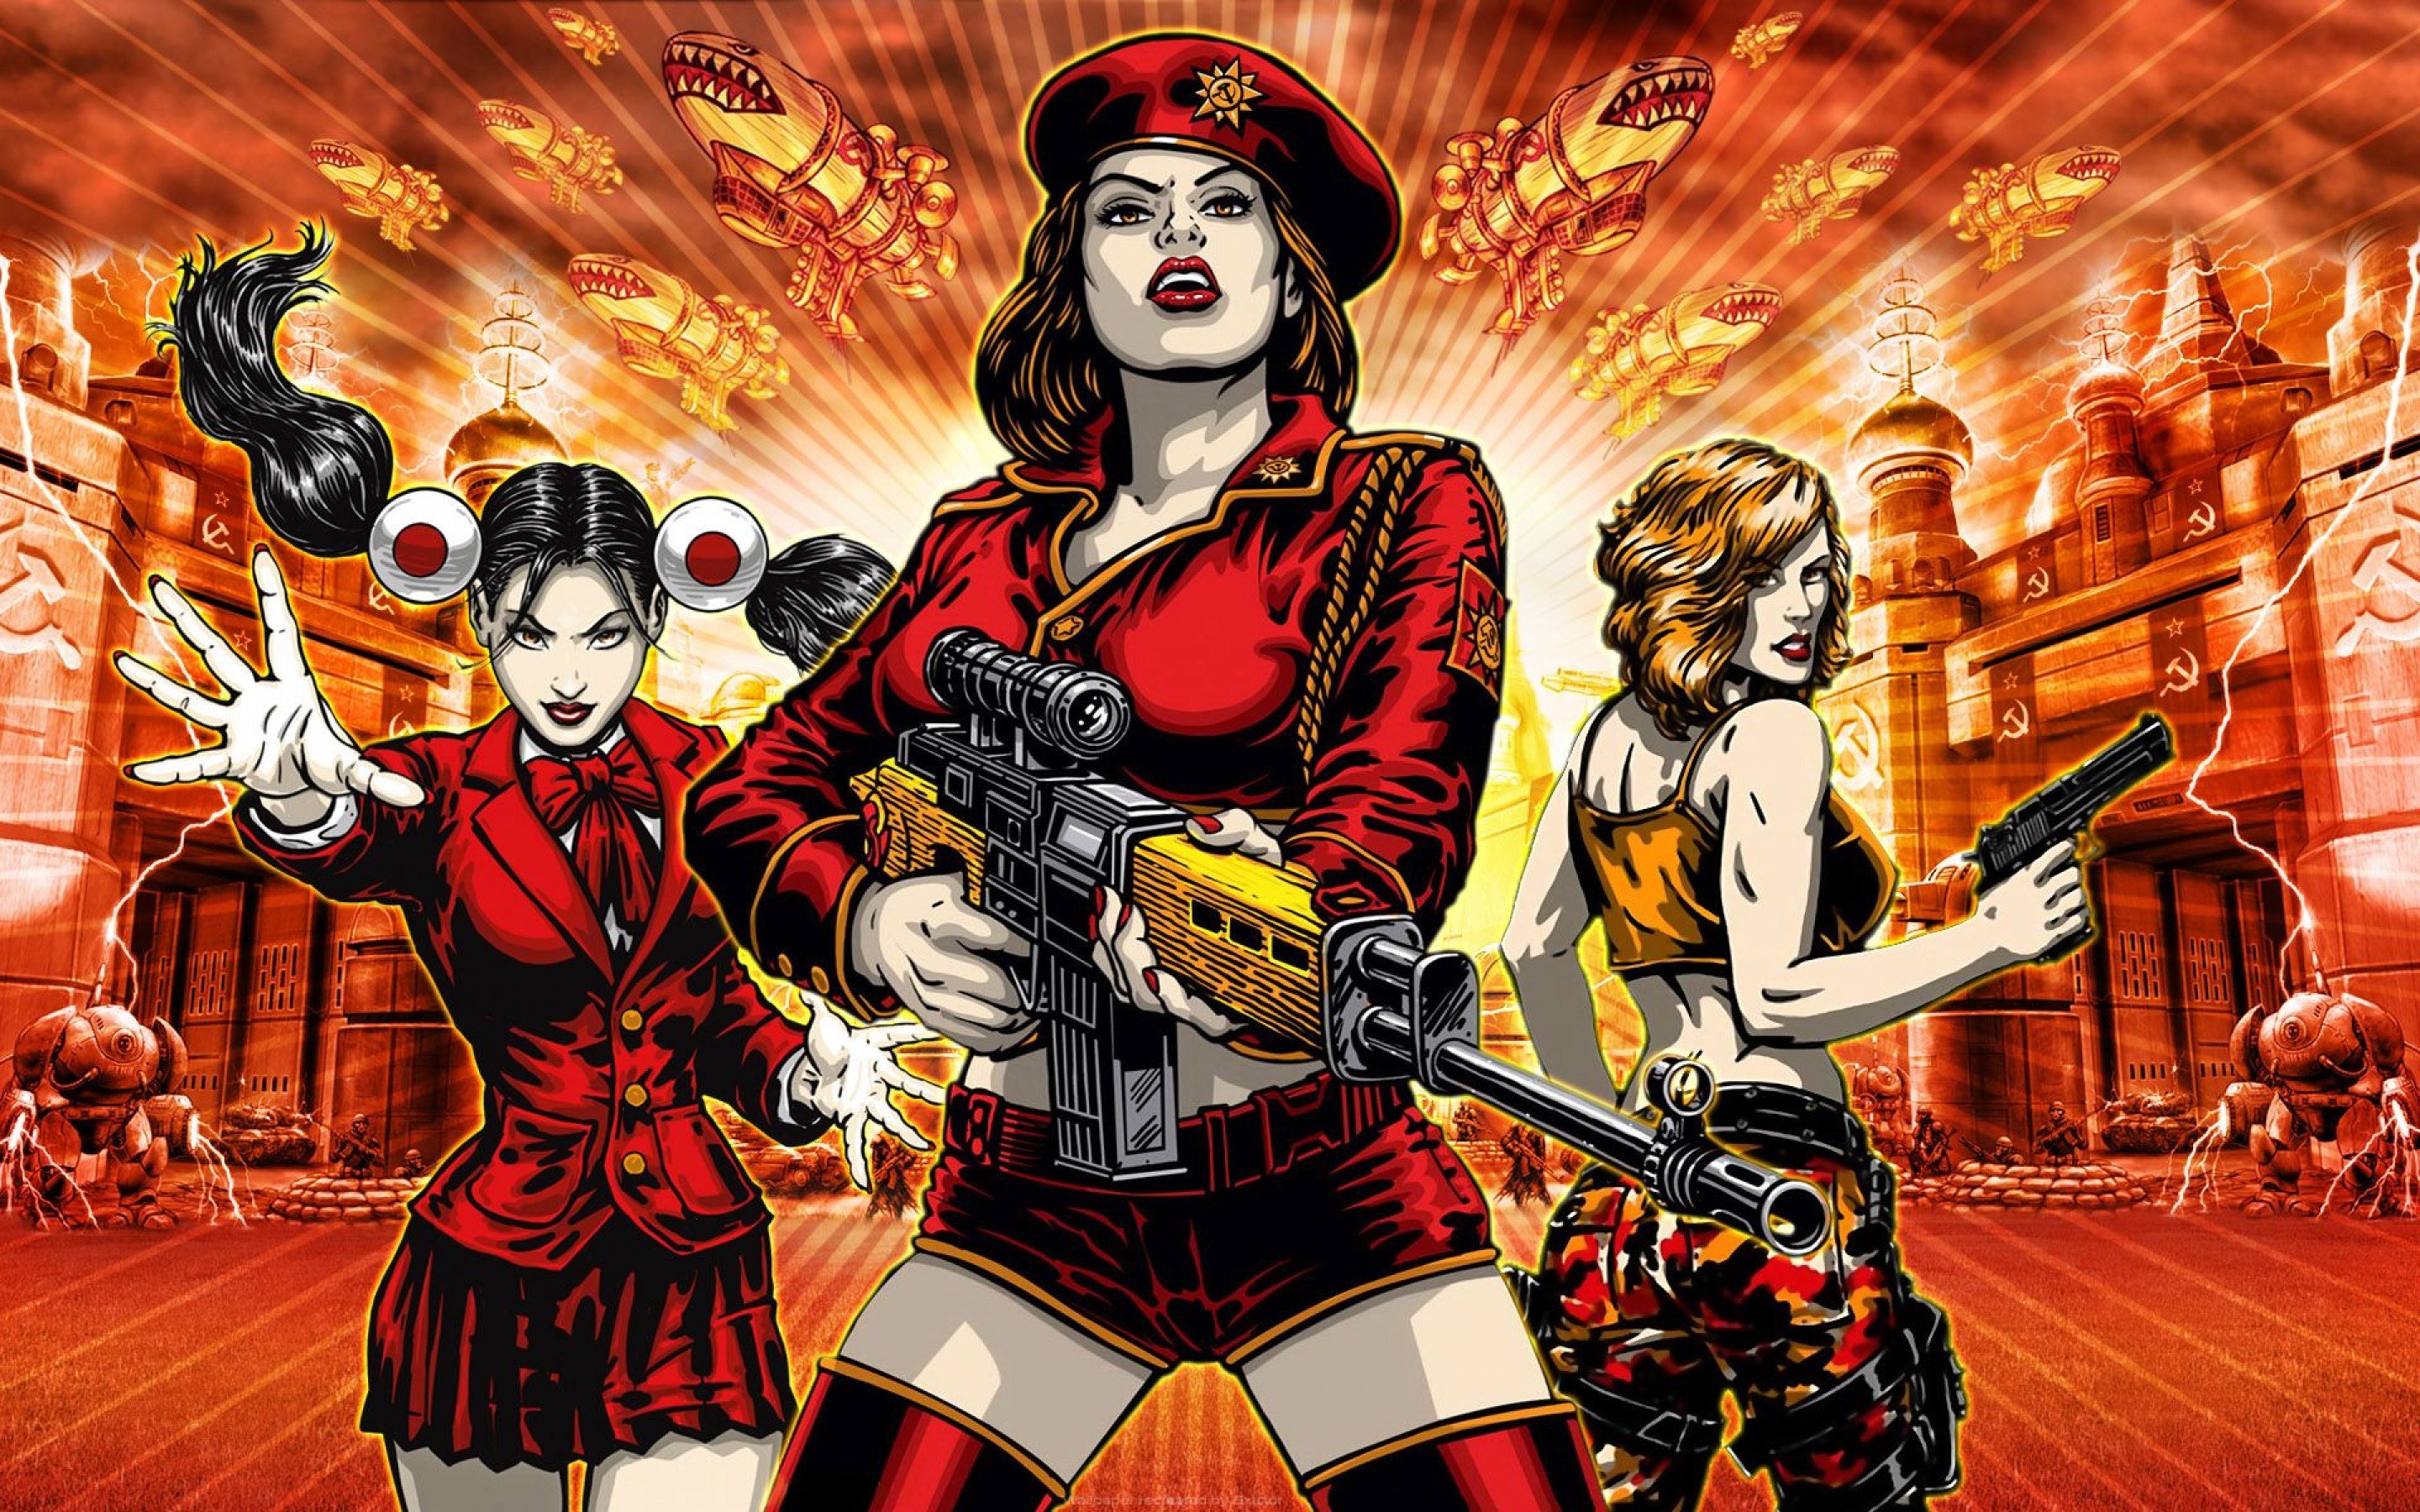 command and conquer red alert 2 strategy